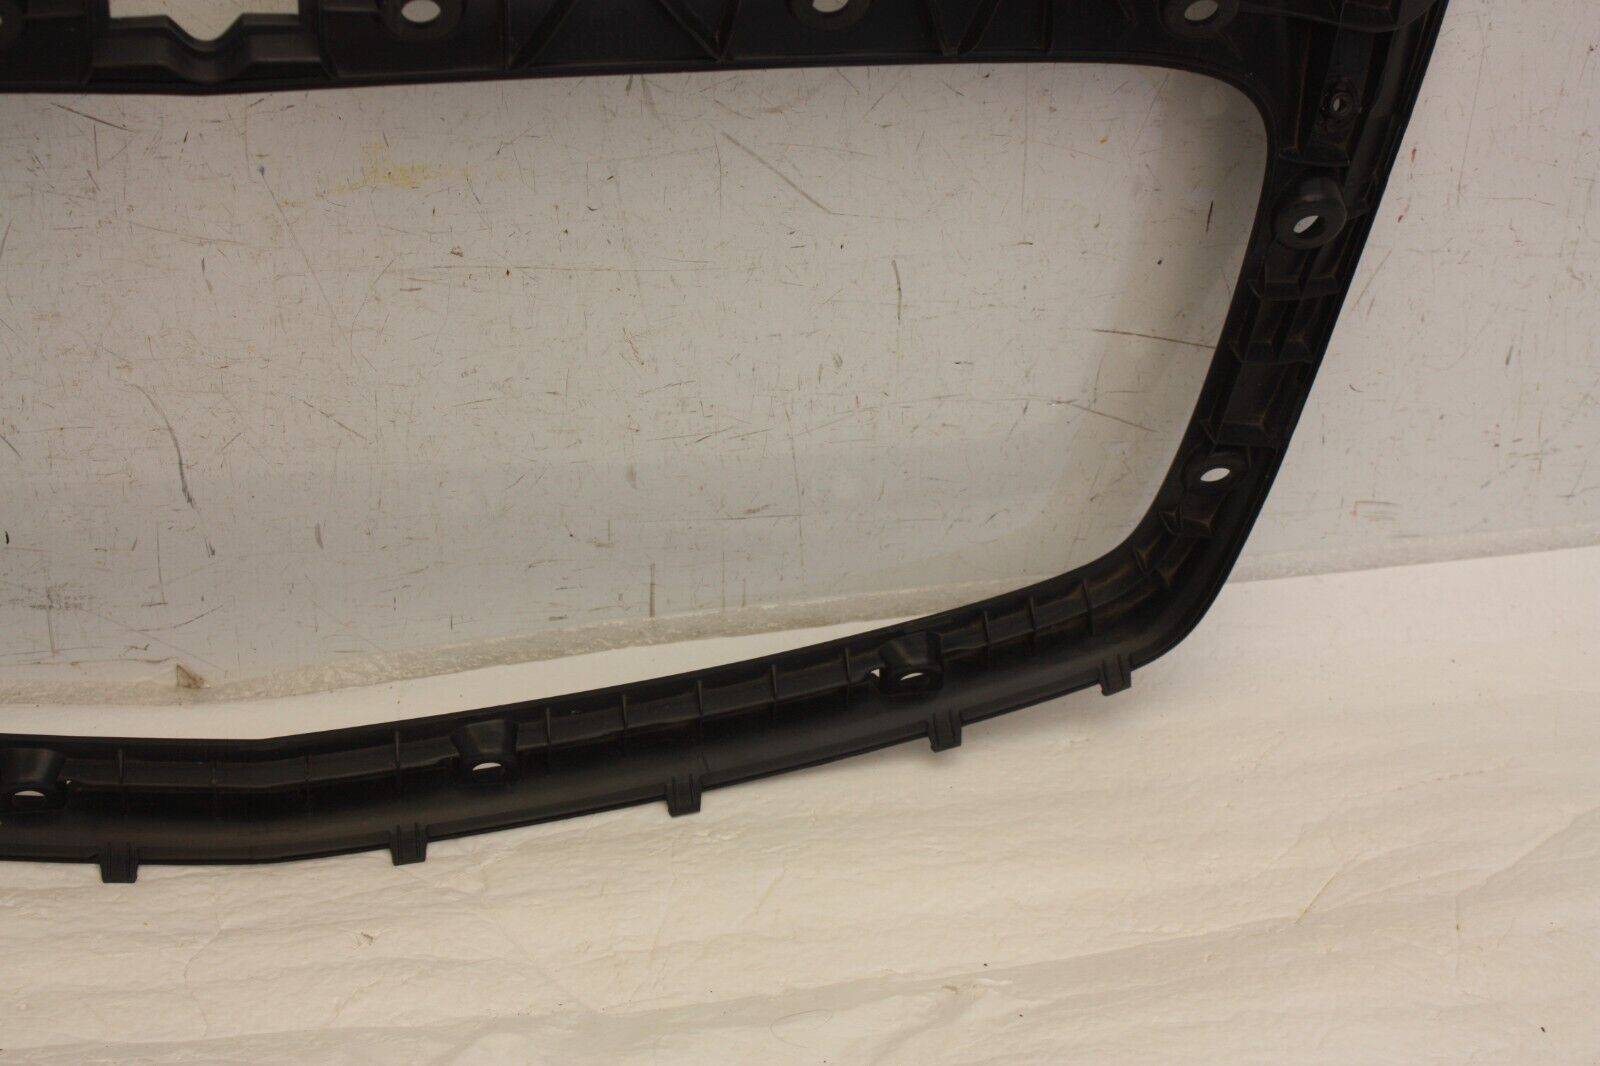 Bentley-Continental-Flying-Spur-GT-GTC-Front-Bumper-Grill-Bracket-3W0806147E-176277649610-11